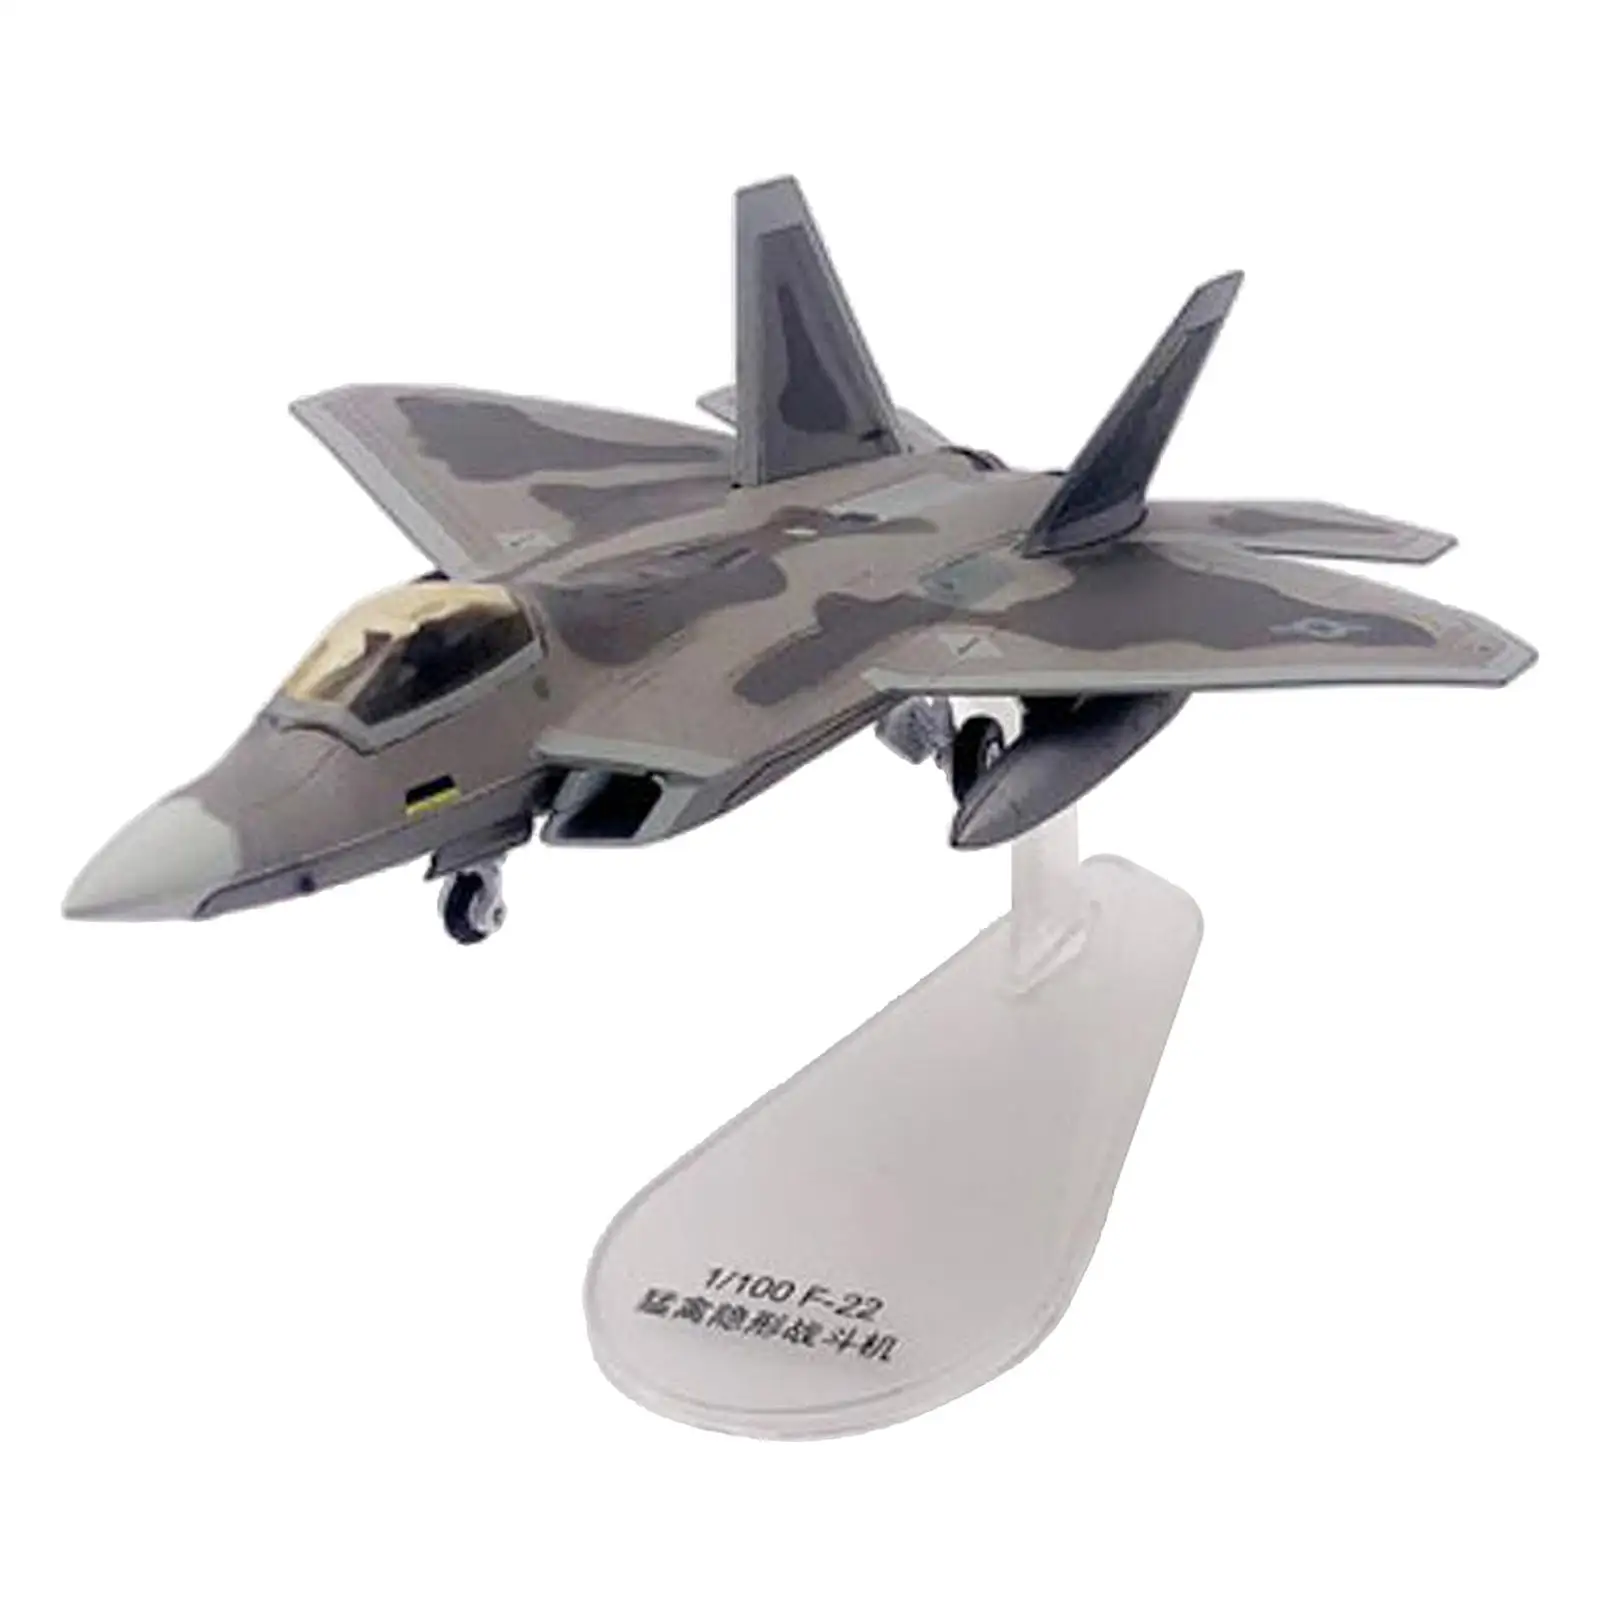 1/100 Scale Airplane Plane Model with Stand Home Shop Display Airplane